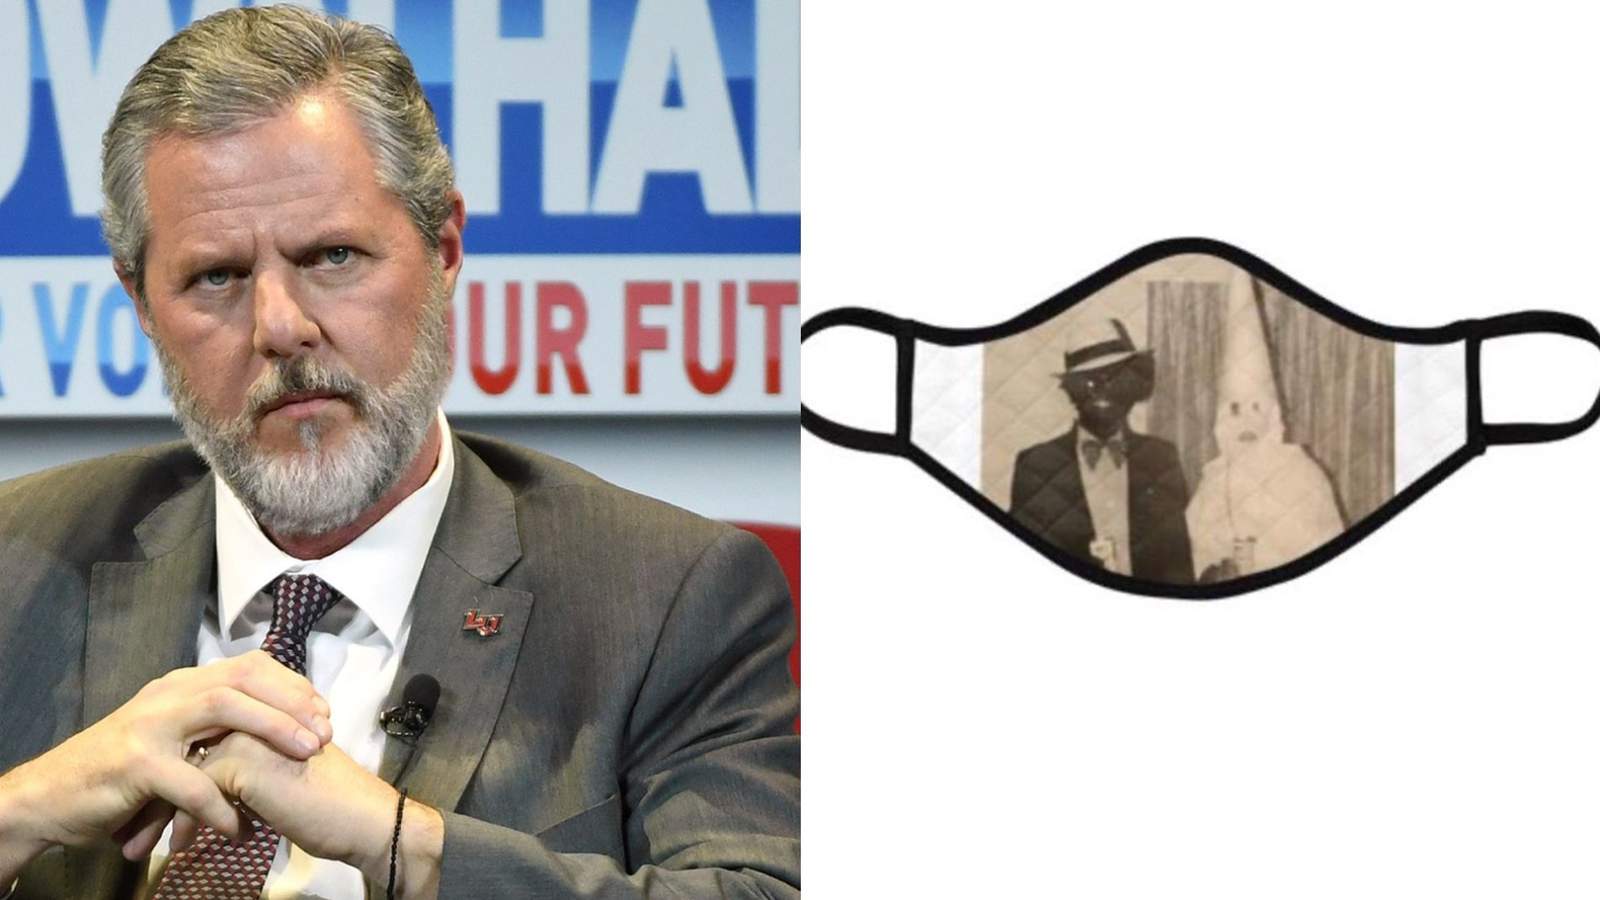 Liberty’s Jerry Falwell ‘designs’ his own mask using Ralph Northam yearbook blackface photo